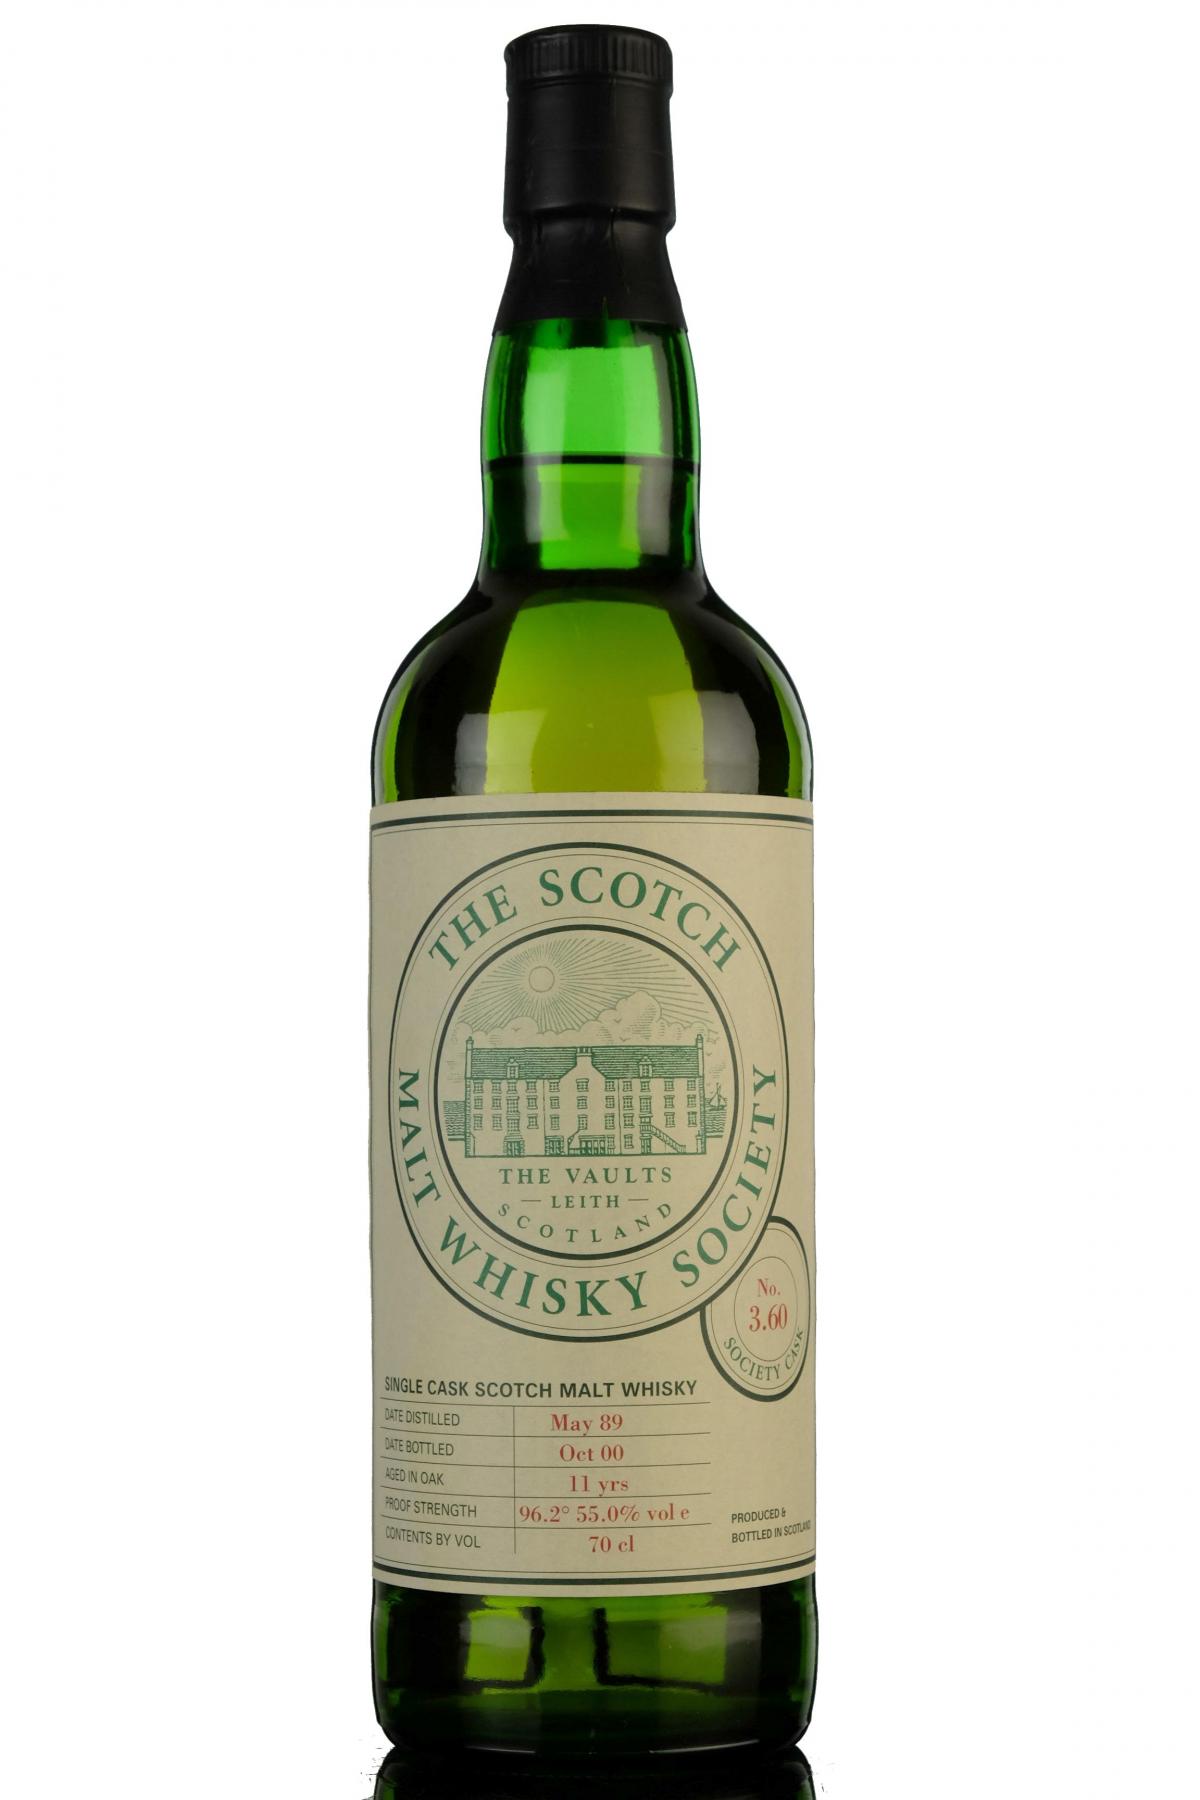 Bowmore 1989-2000 - 11 Year Old - SMWS 3.60